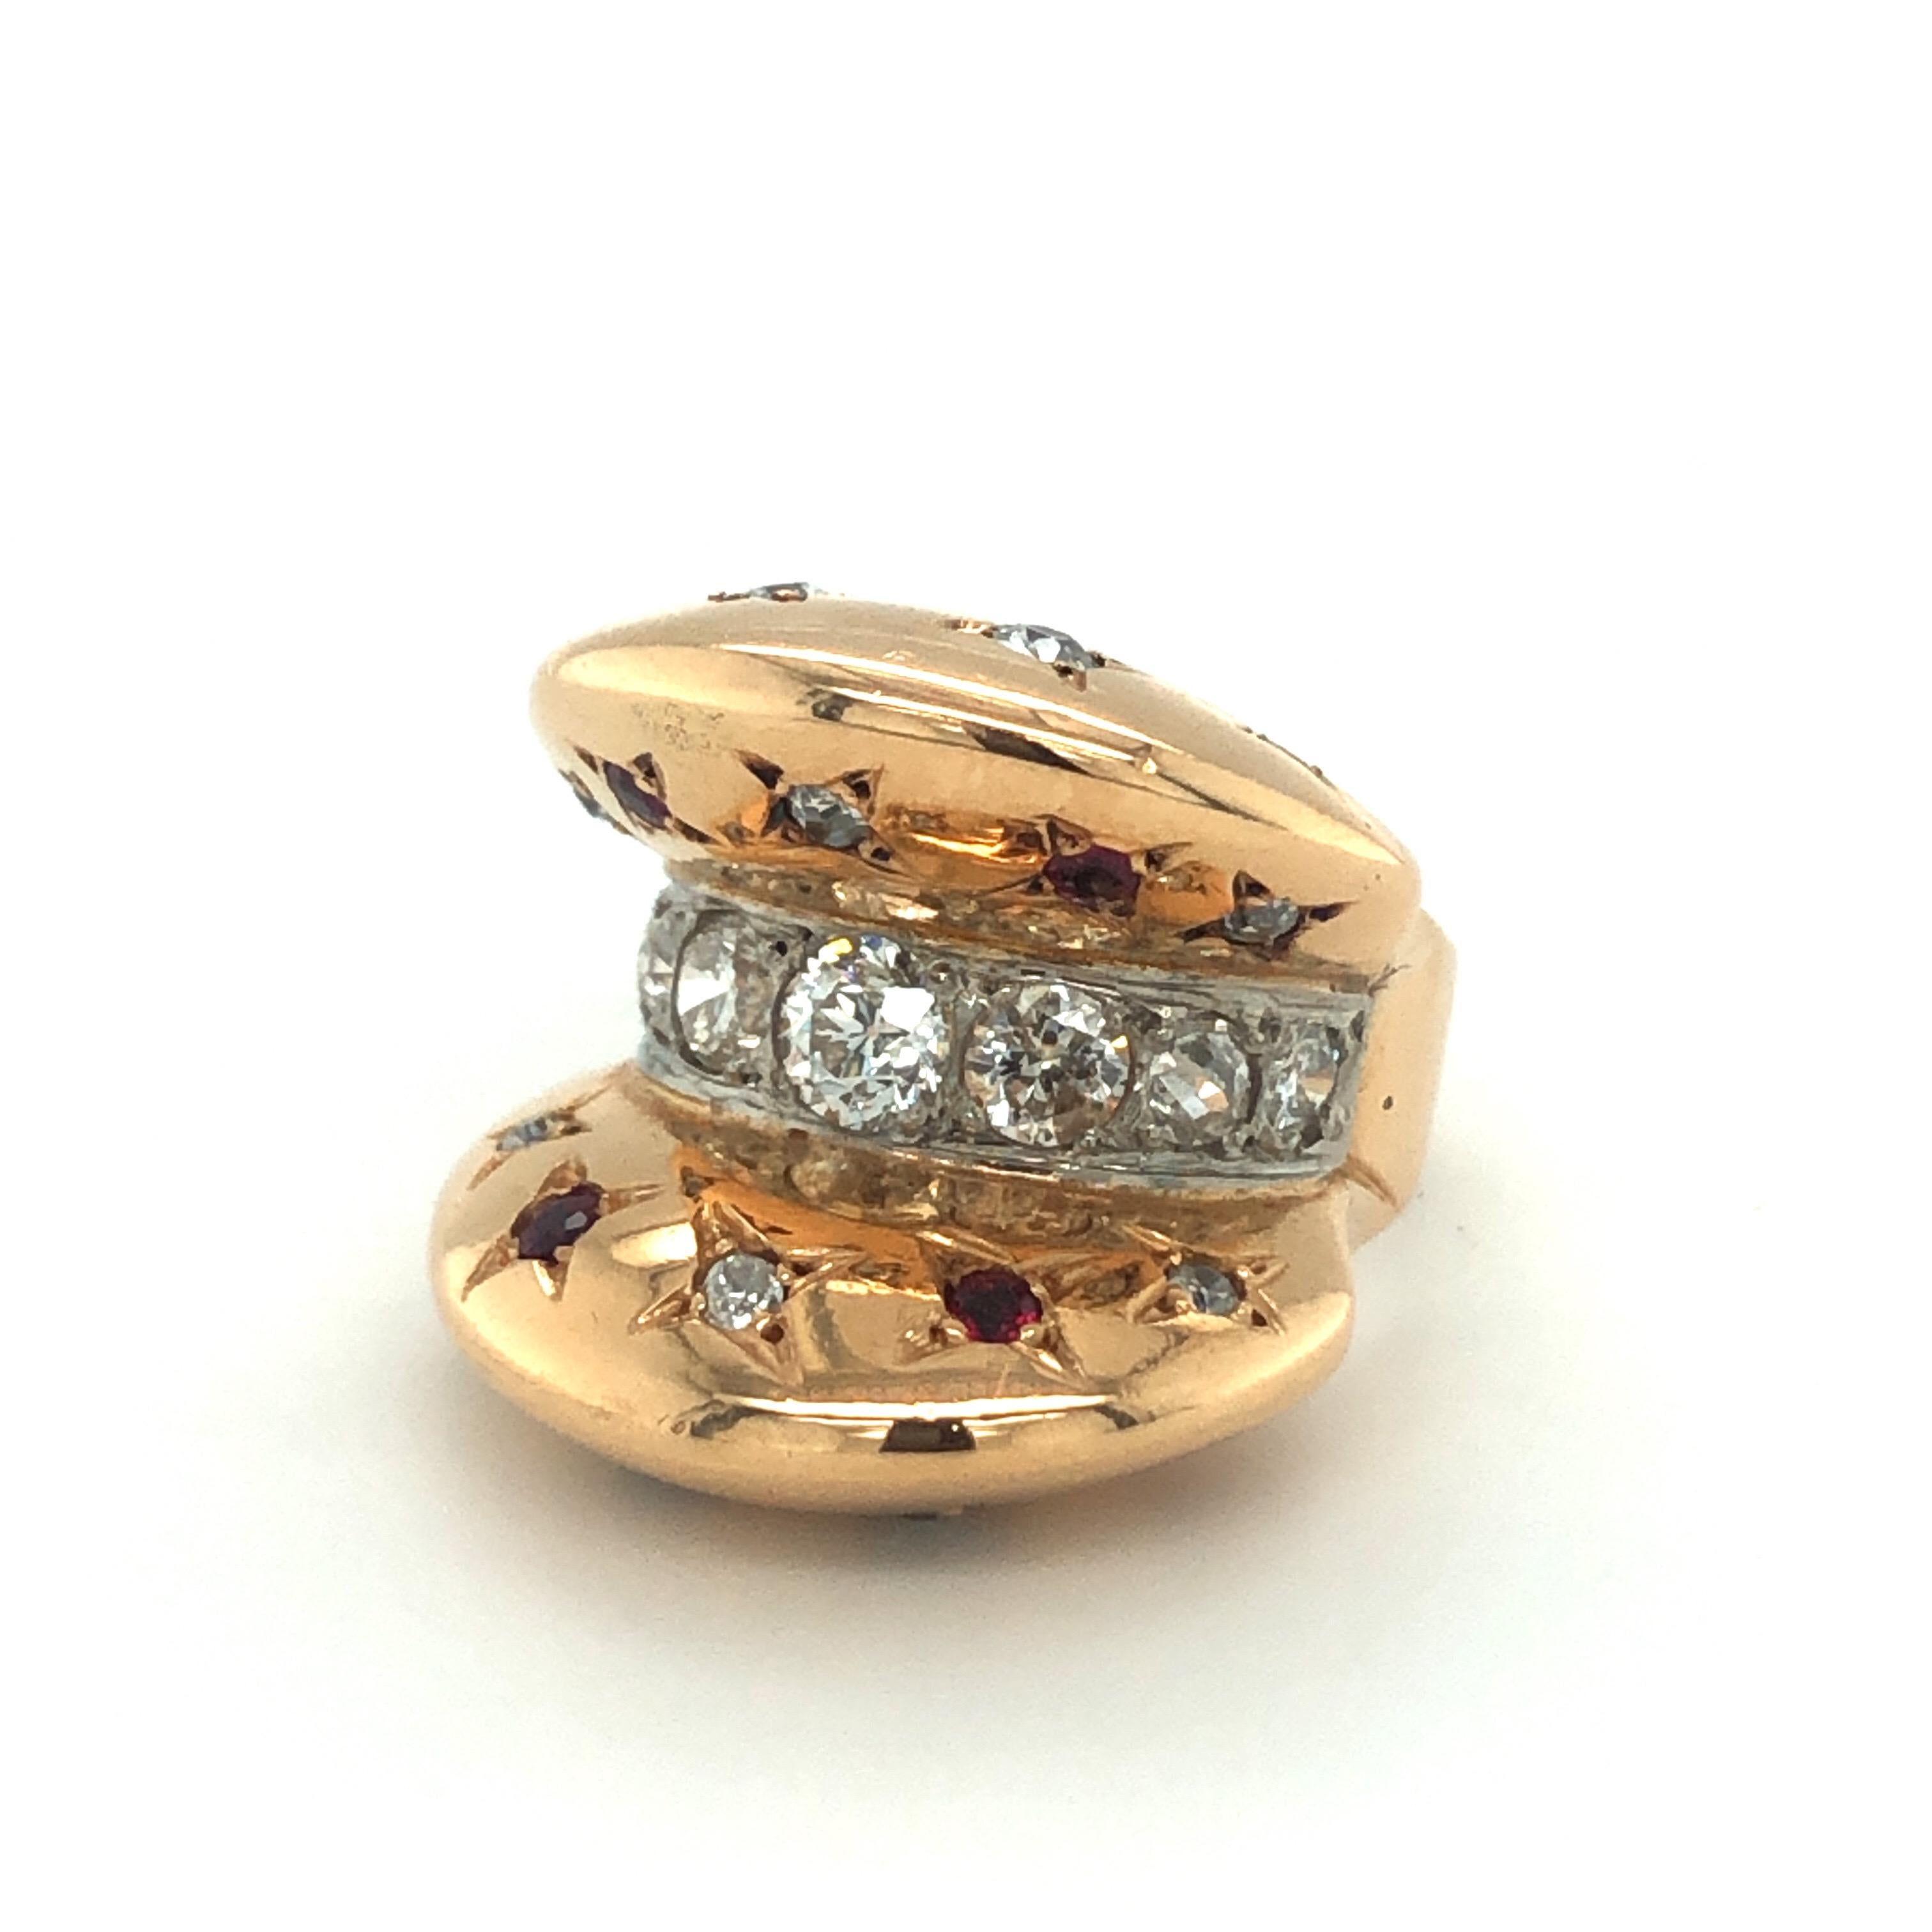 18 karat rose gold diamond and ruby retro ring, circa 1940.
A one-of-a-kind retro design ring, the central line set with graduated round old-cut diamonds totalling circa 0.9 carats and flanked by 2 halfmoon-shaped, arched endings enhanced with